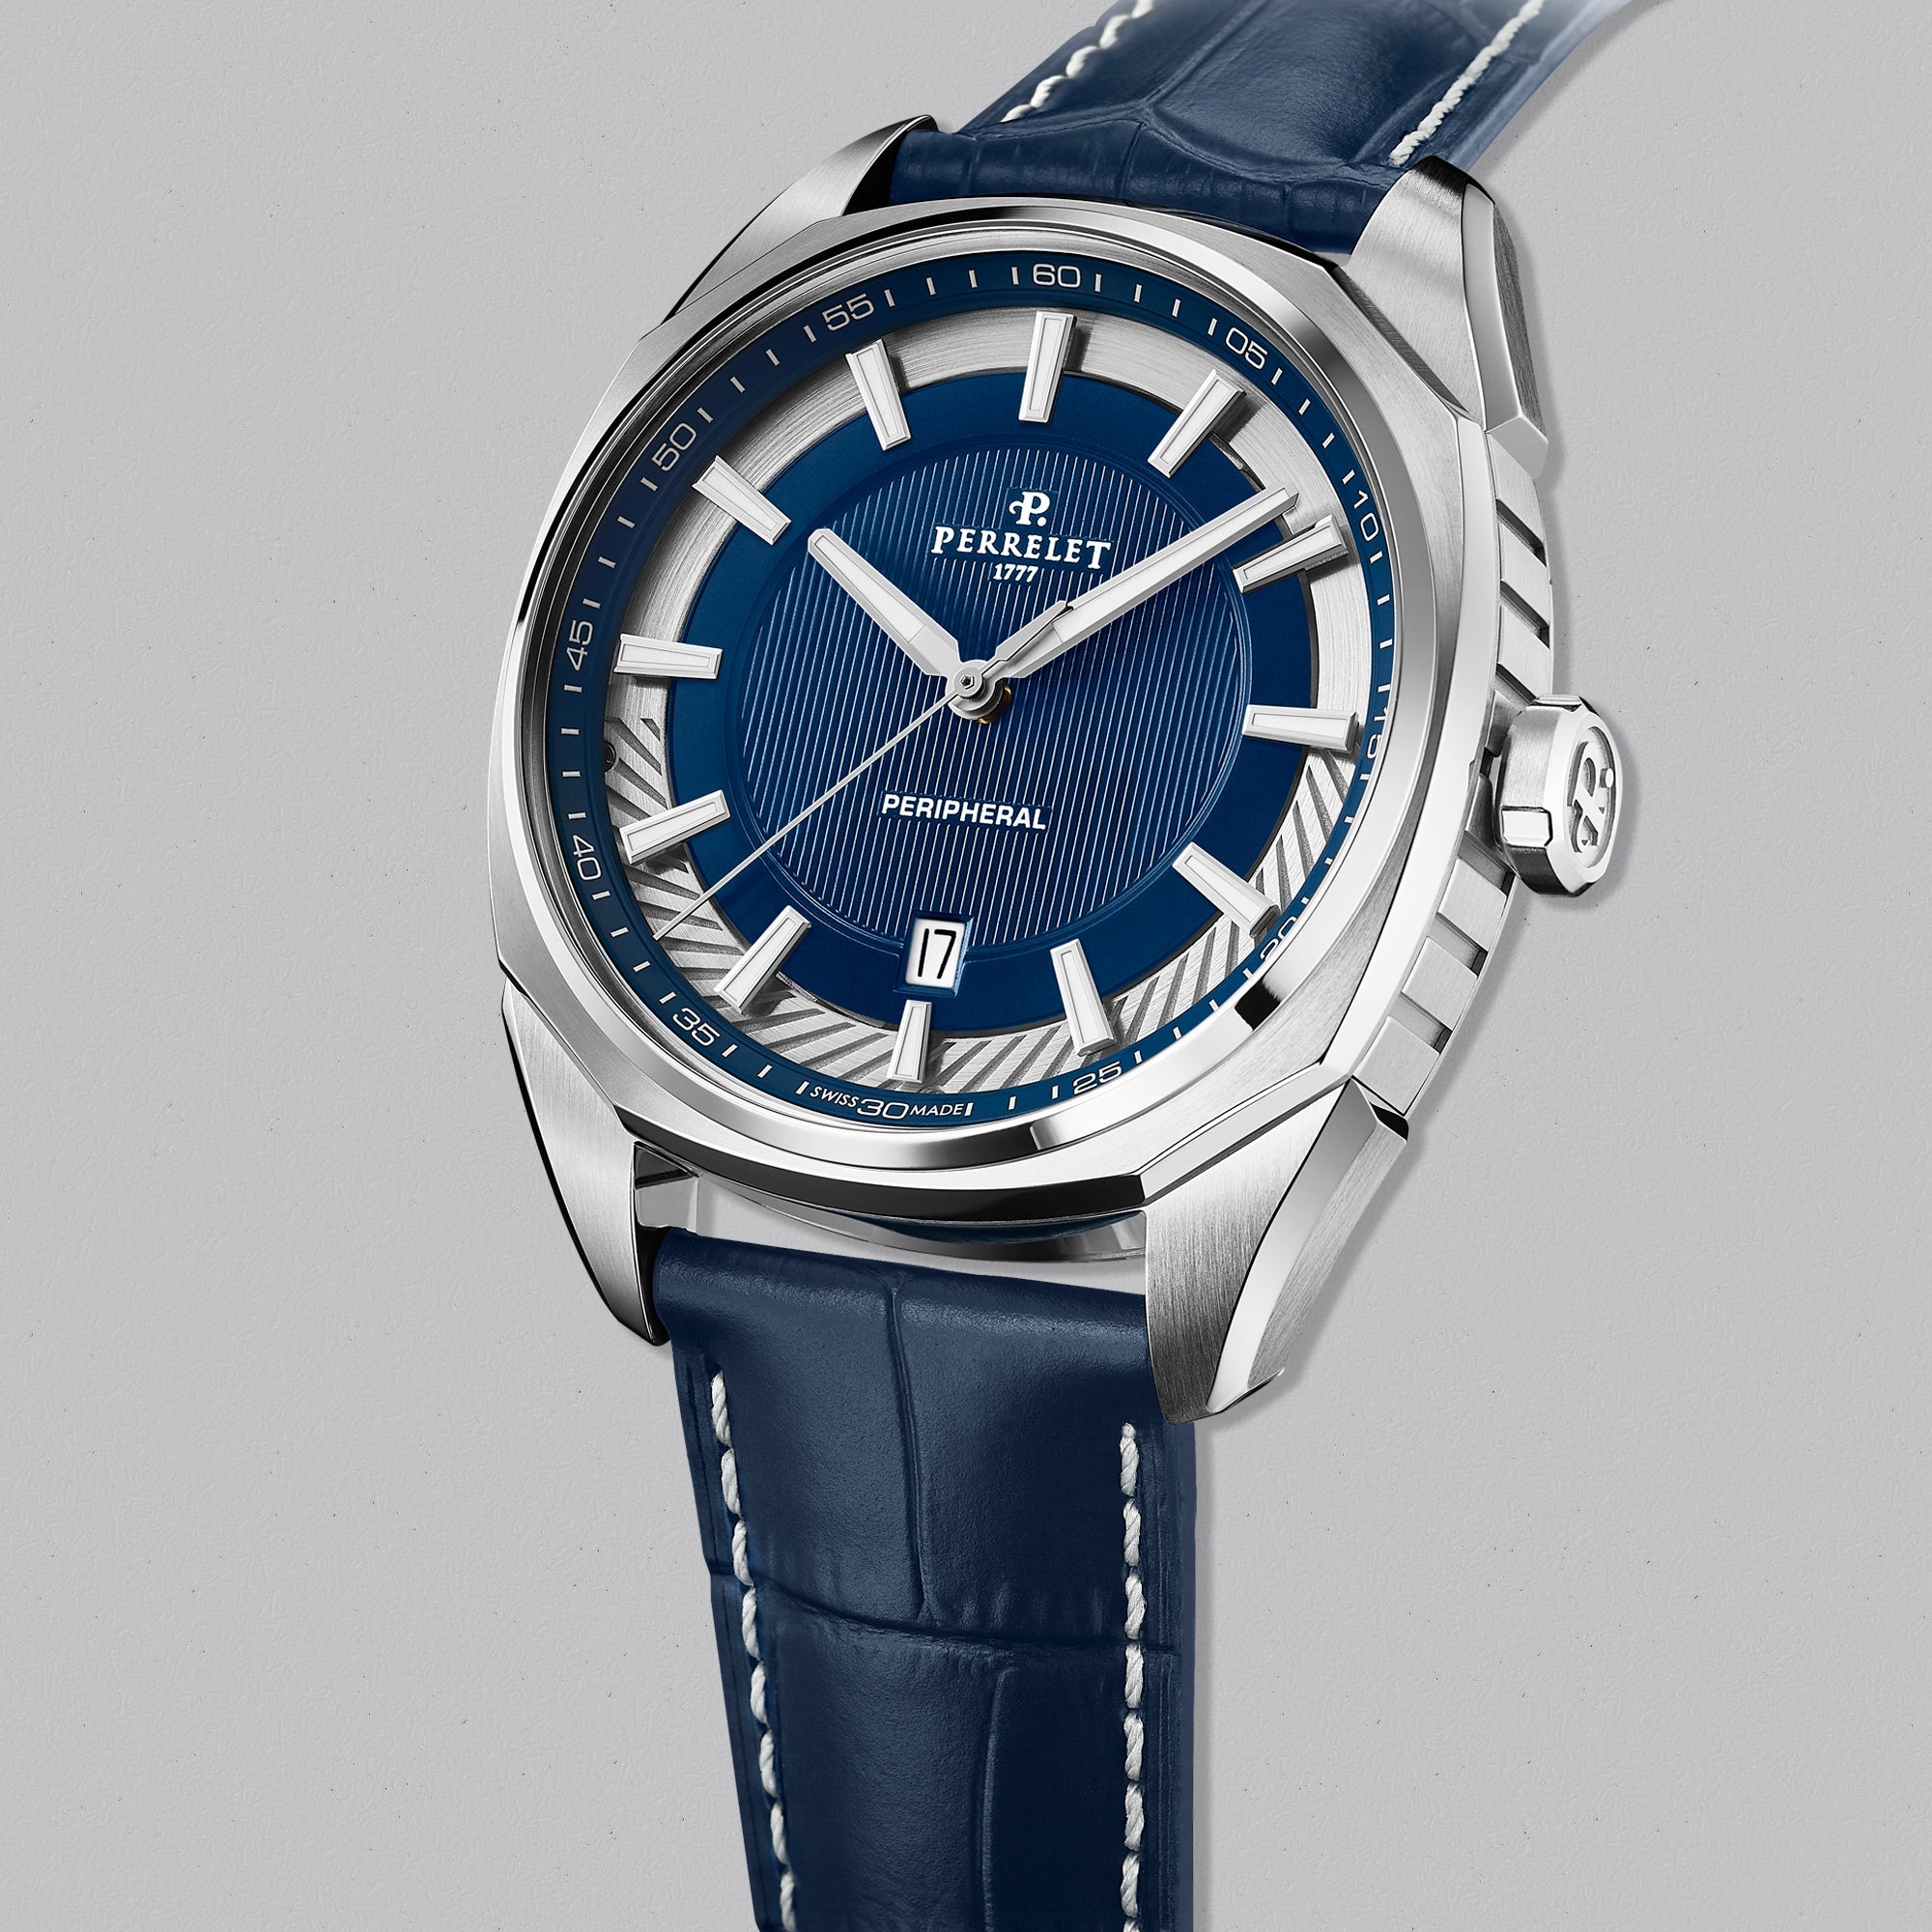 LAB PERIPHERAL 3H SS BLUE DIAL - Swiss Gallery Iraq PERRELET